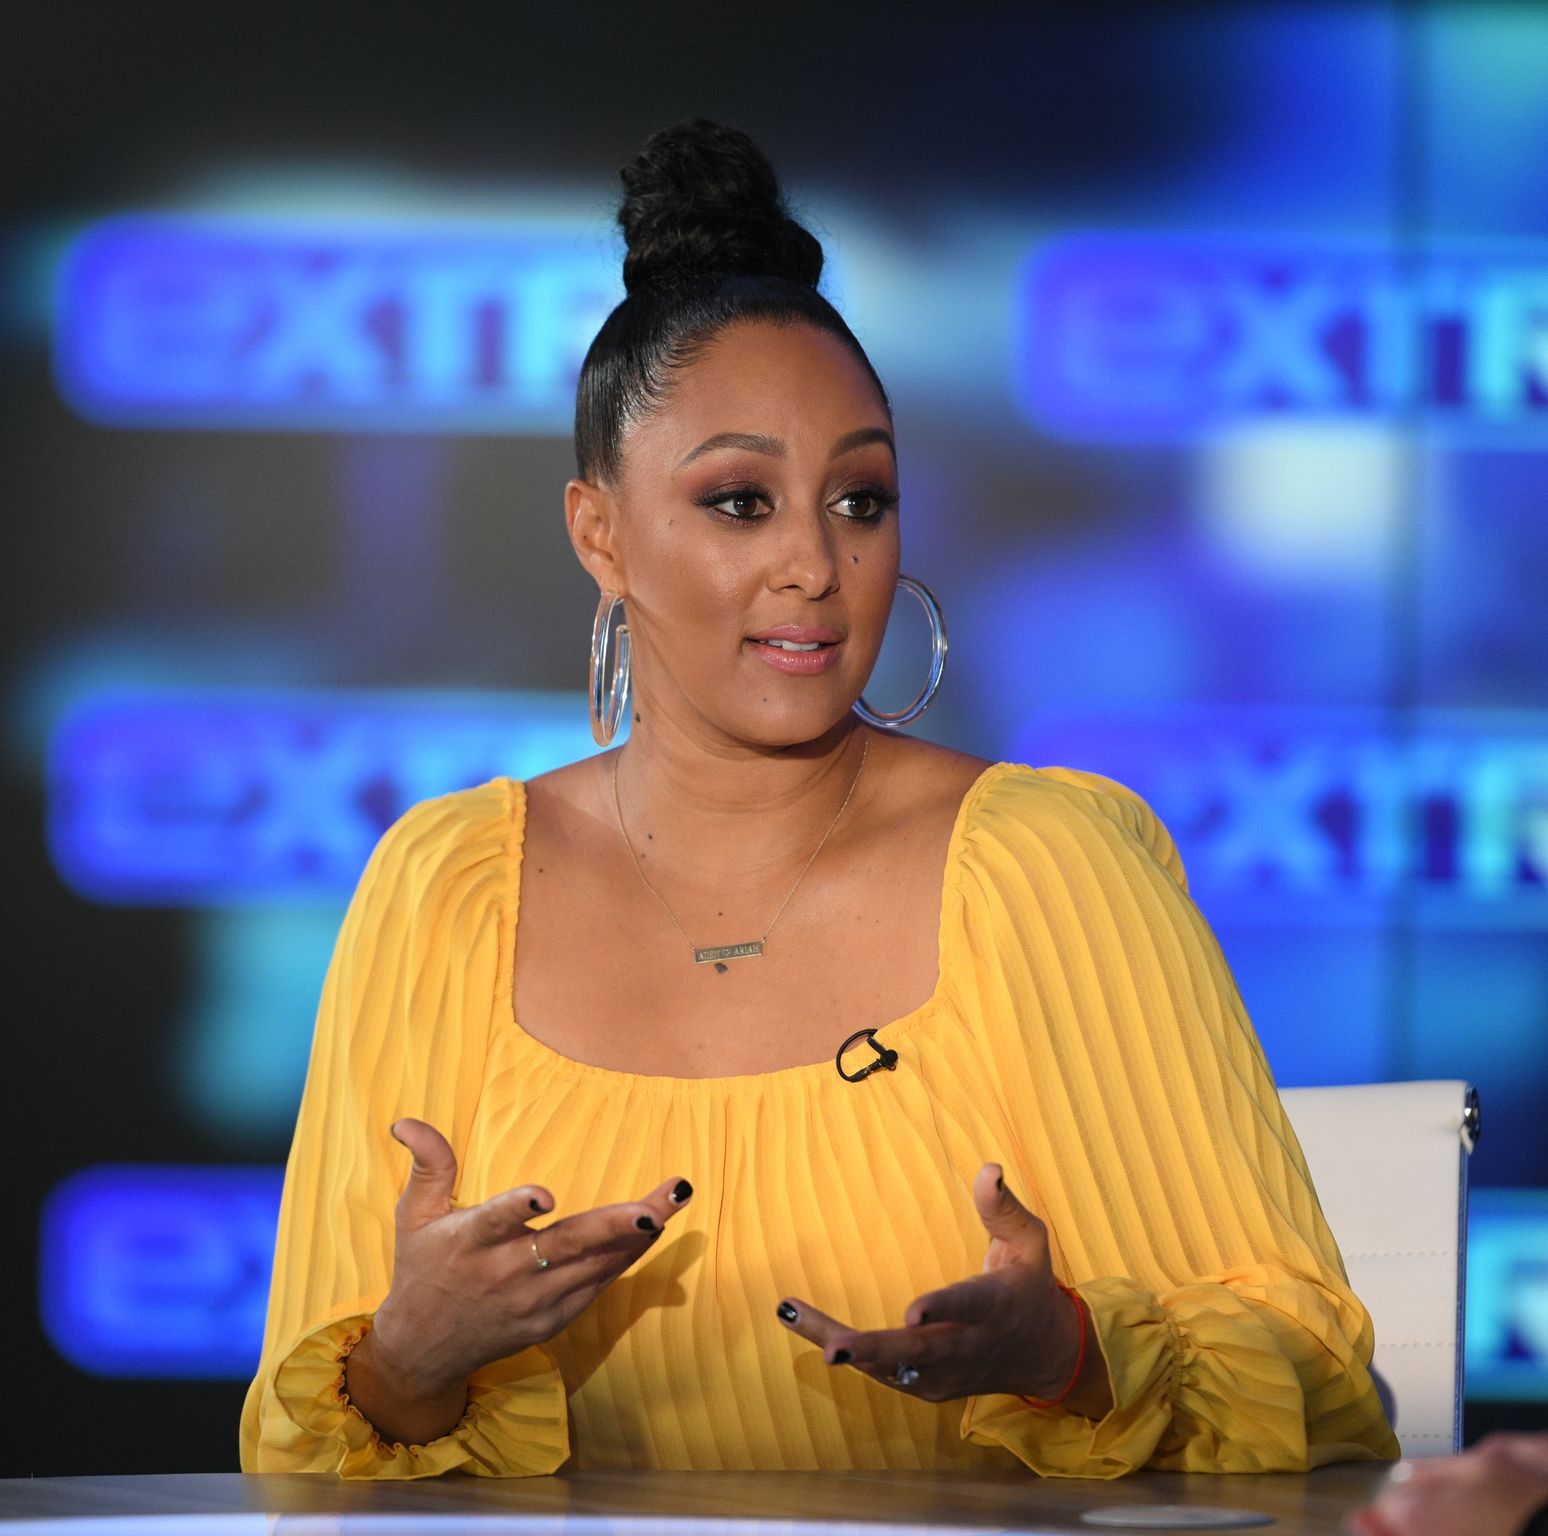 Tamera Mowry at "Extra" on November 05, 2019 in Burbank. | Photo: Getty Images